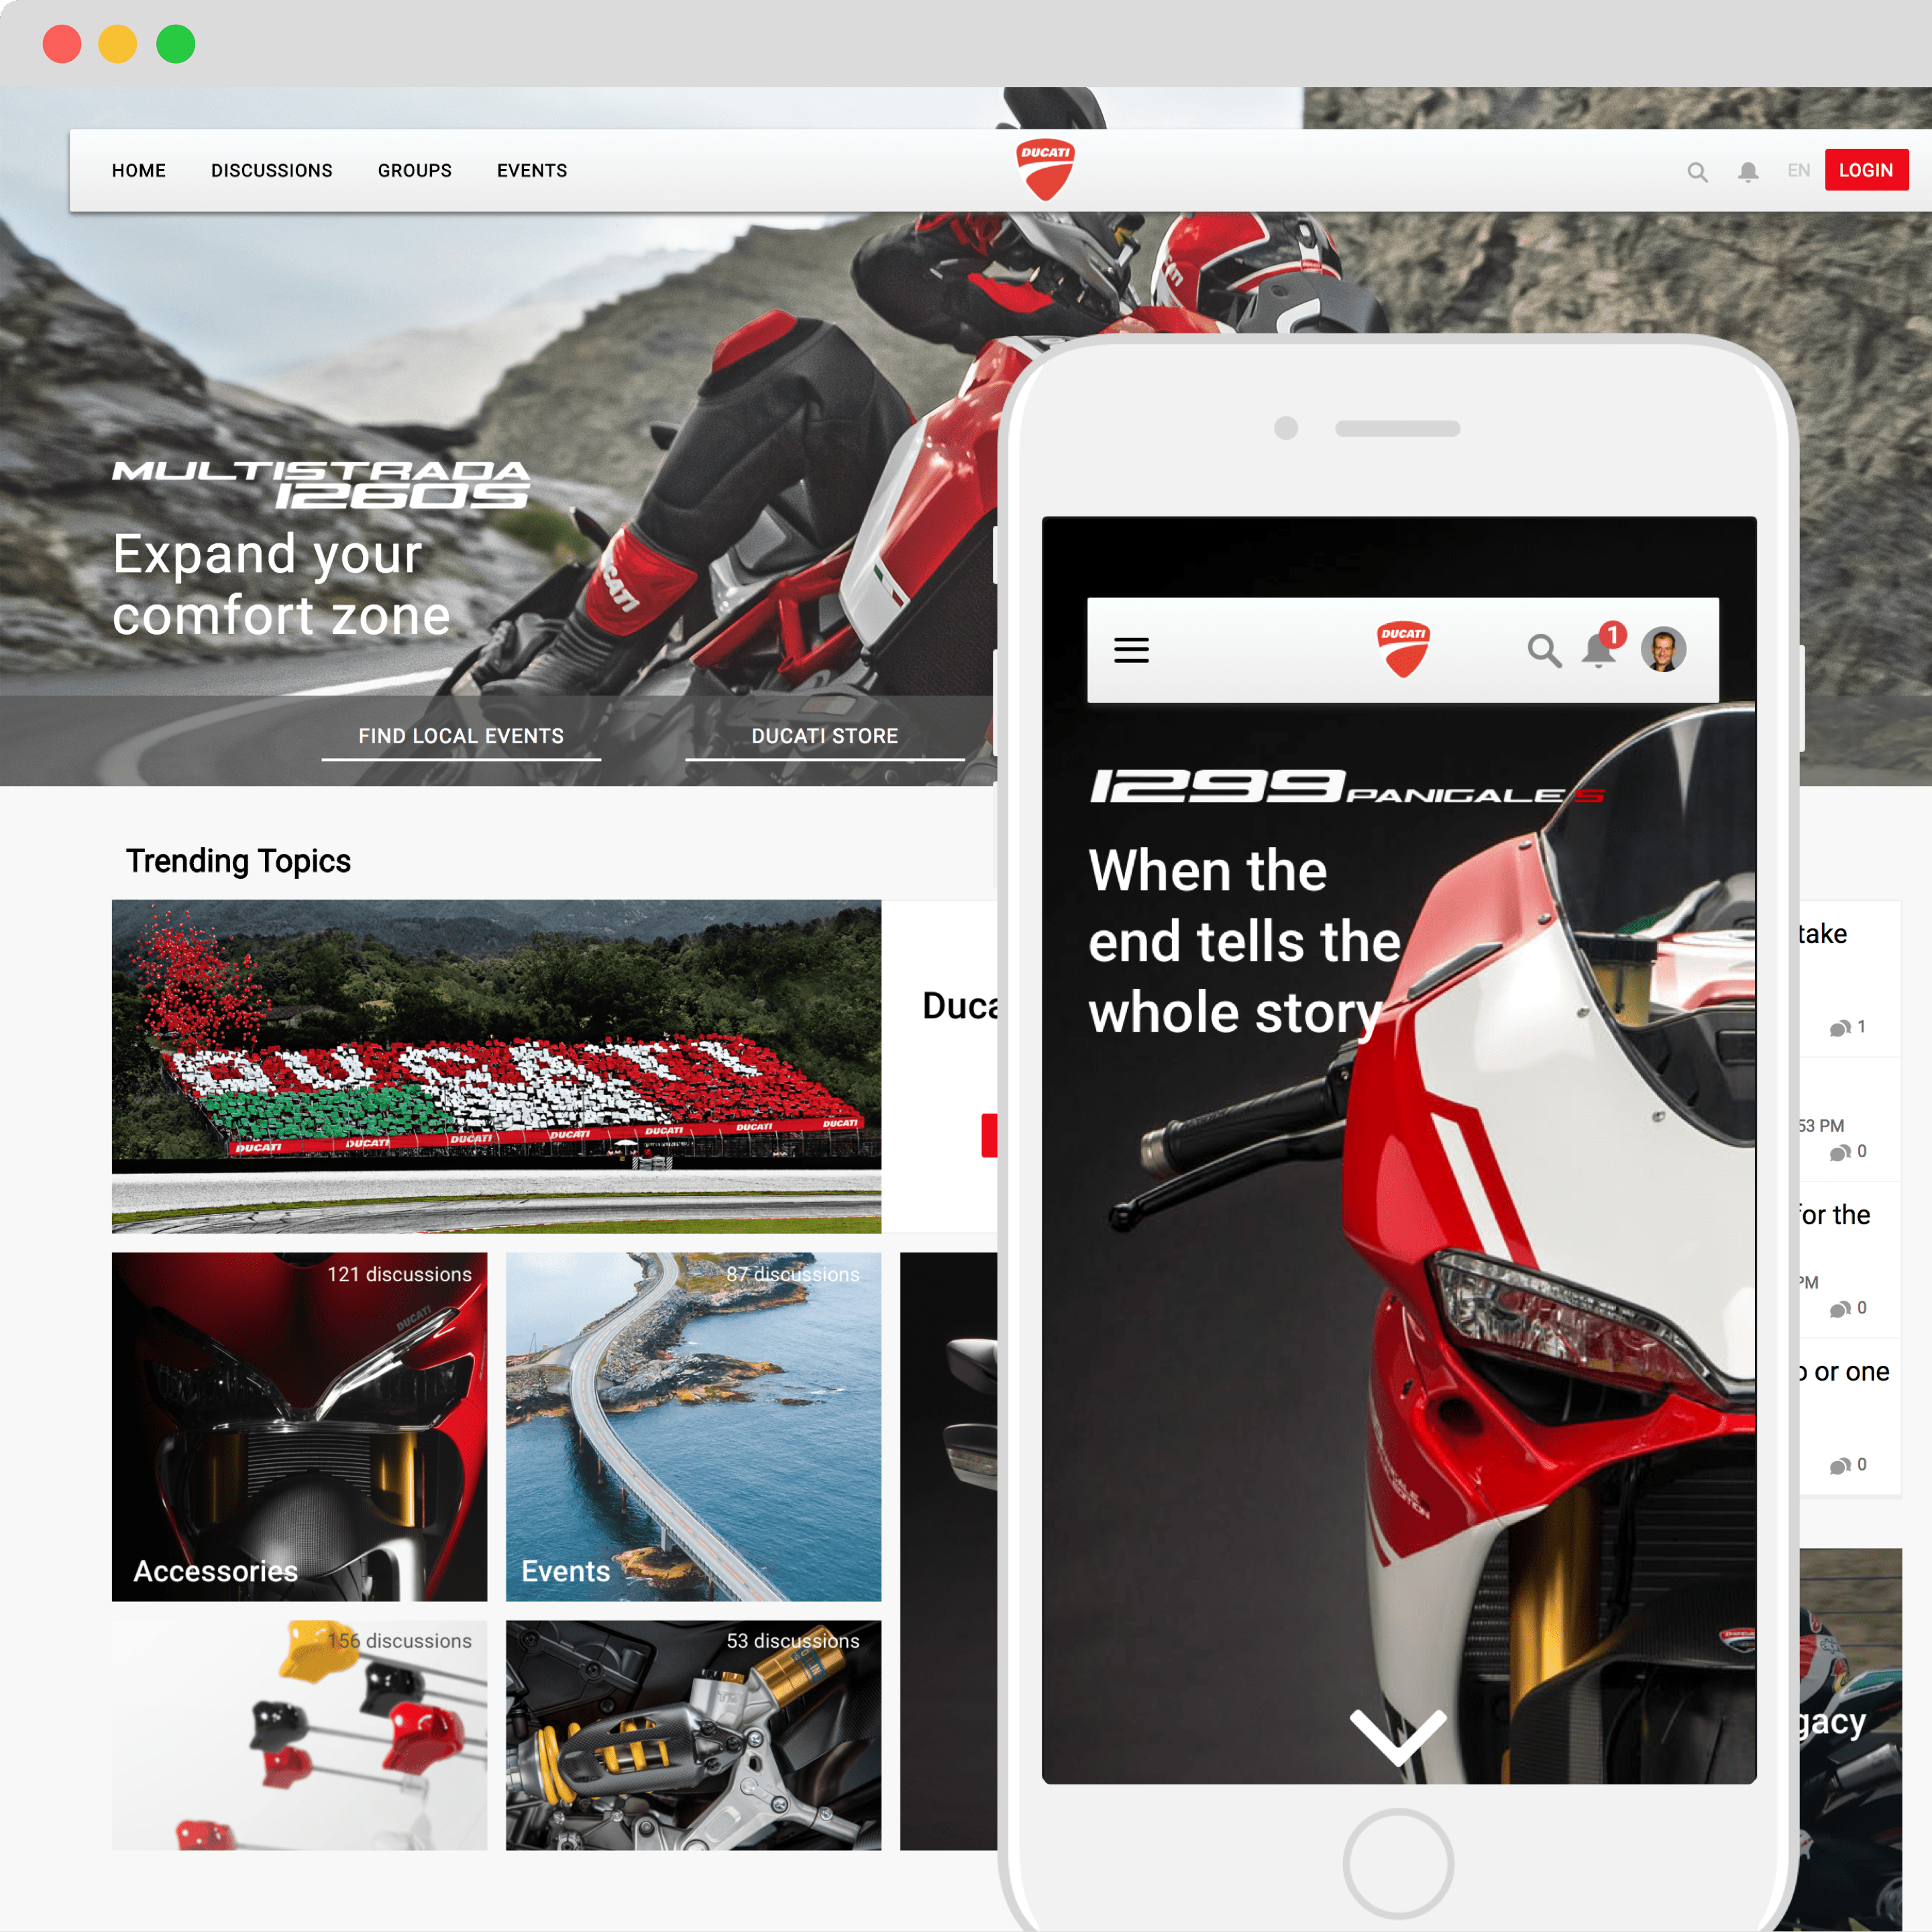 Ducati forum website where customers can have discussions, next to a mobile phone with the Ducati customer portal app open.